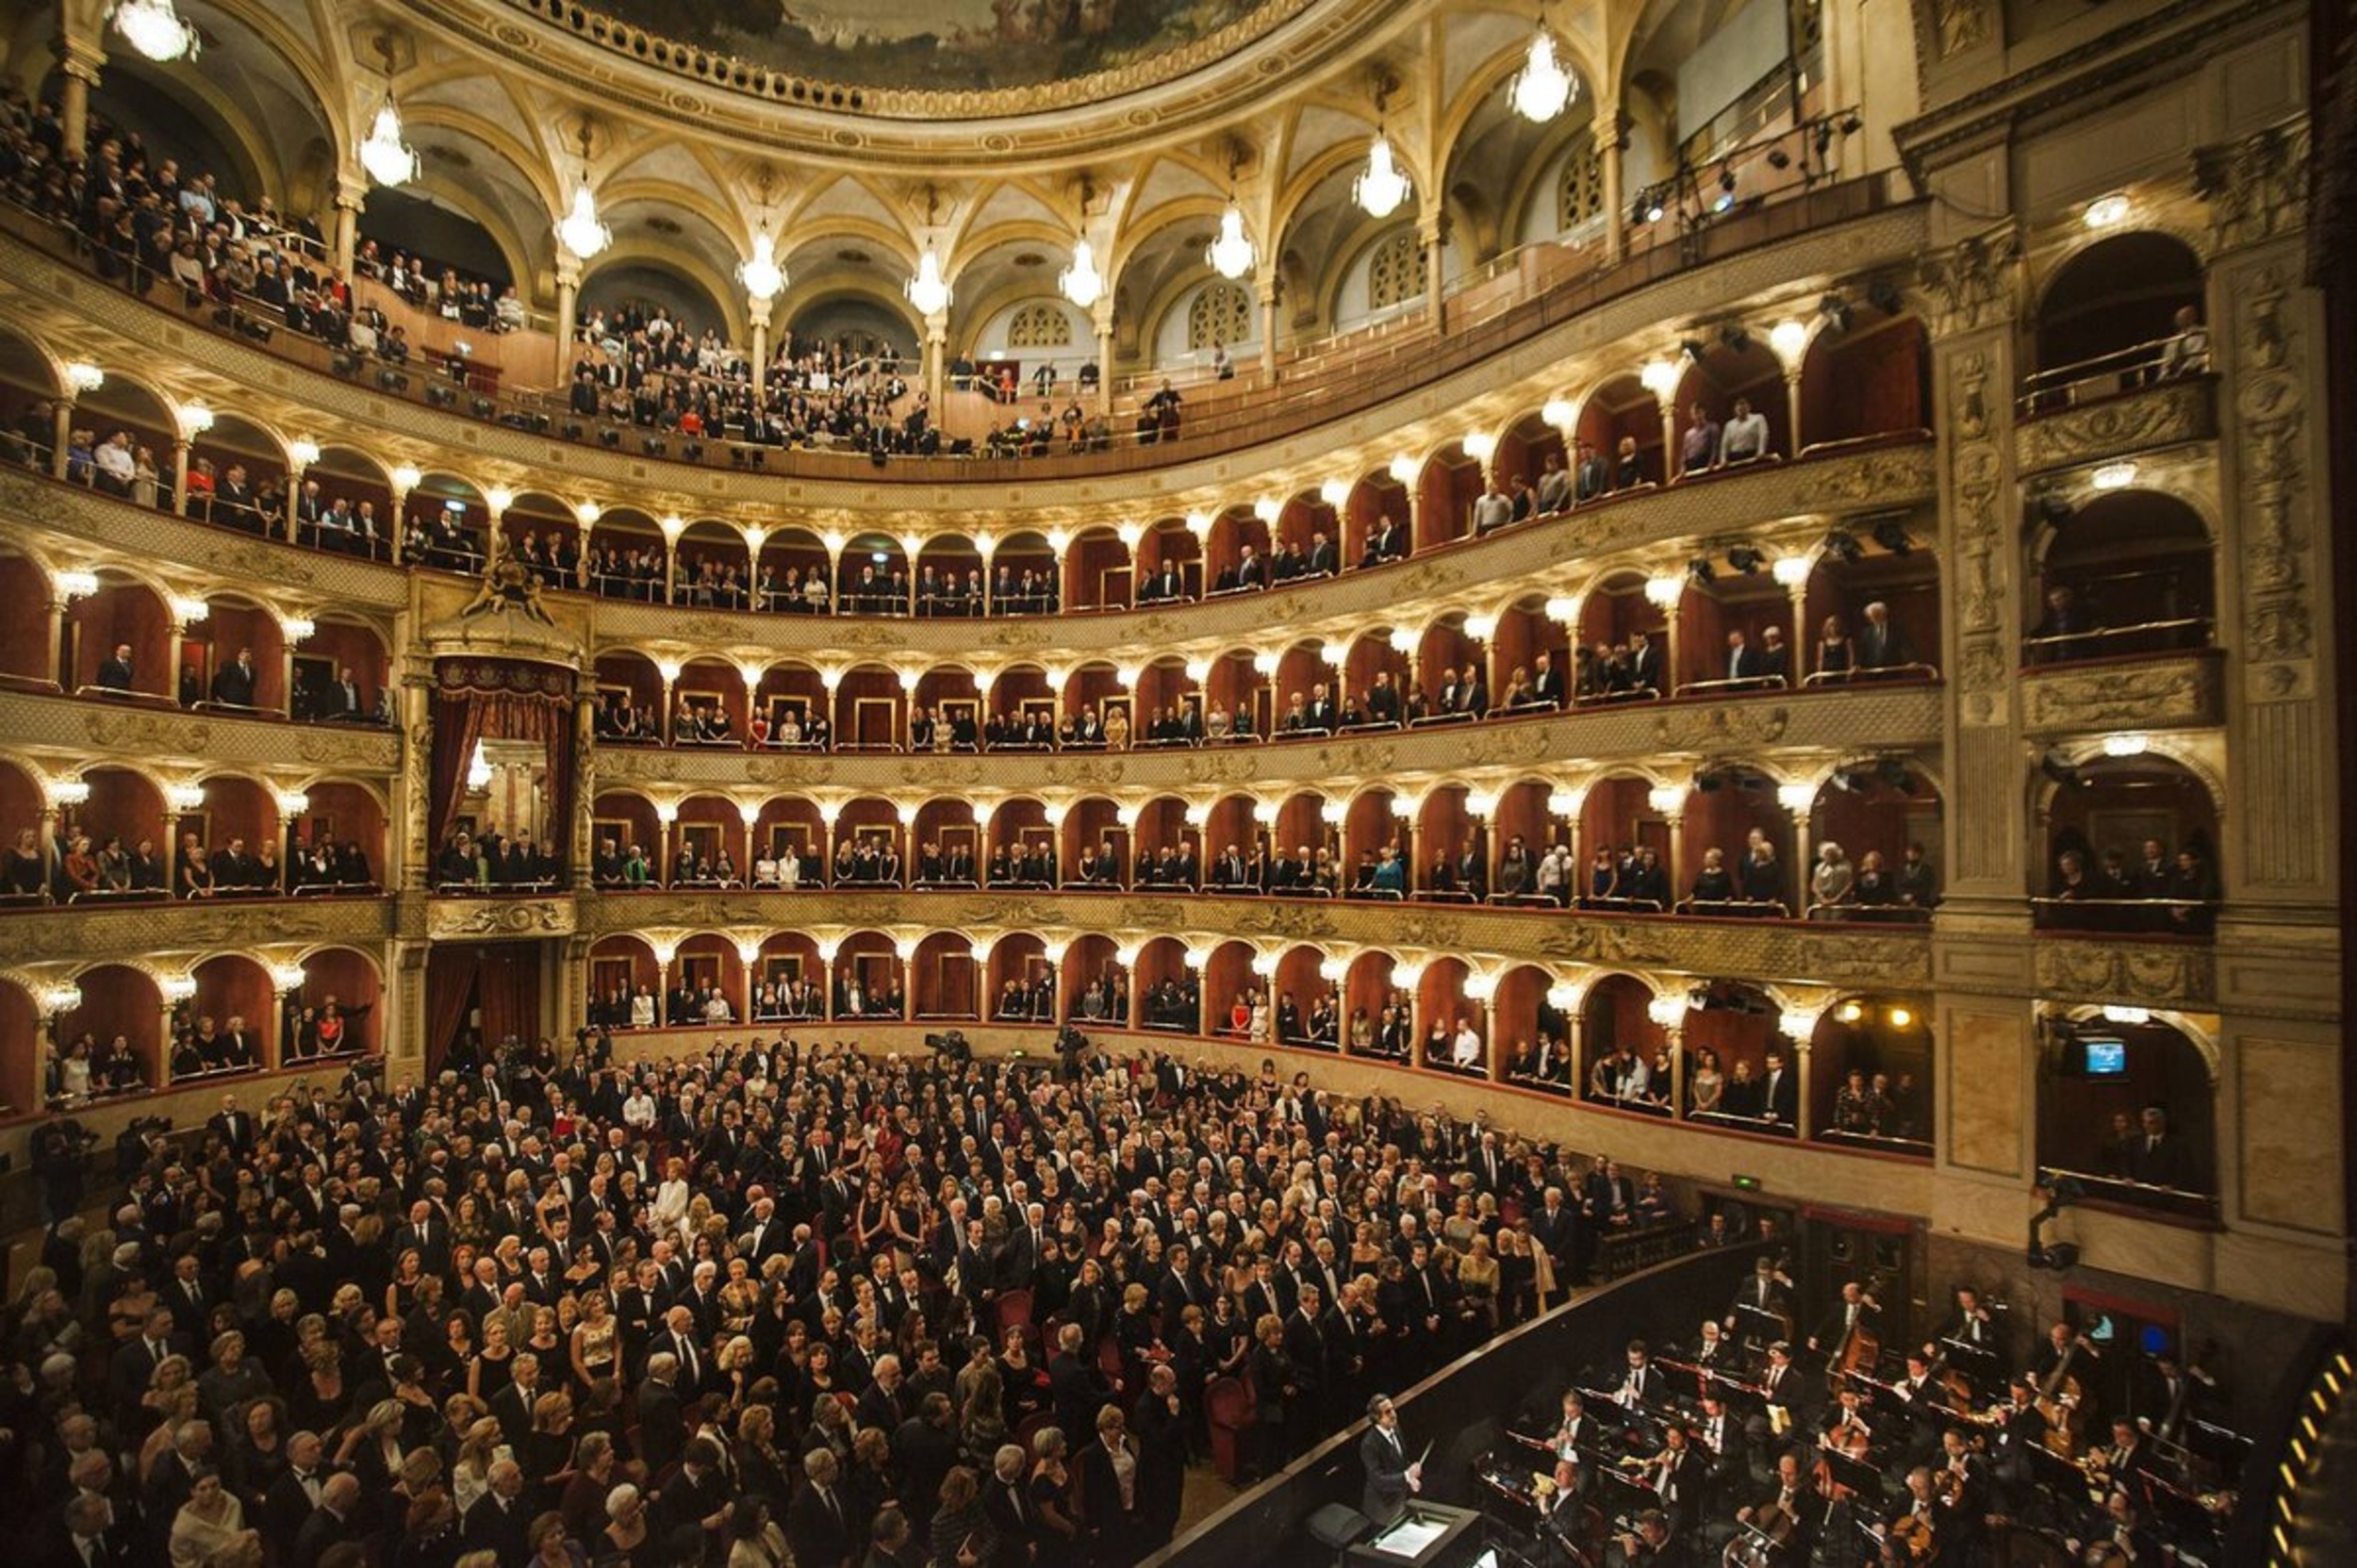 <p>Since its founding by Domenico Costanzi in the late 19th century, the Rome Opera House has remained one of the finest opera houses in Europe. We recommend you stop by for an opera or if you find that too snooty, check out one of the many fashion shows put on by brands like Dior. <em>Is that</em> too snooty for you? Take a tour instead, which will give you access to the neo-classical design. </p><p>You may also like: <a href='https://www.yardbarker.com/lifestyle/articles/pep_talk_23_foods_and_drinks_you_didnt_know_contain_caffeine_101223/s1__38120216'>Pep talk: 23 foods and drinks you didn’t know contain caffeine</a></p>